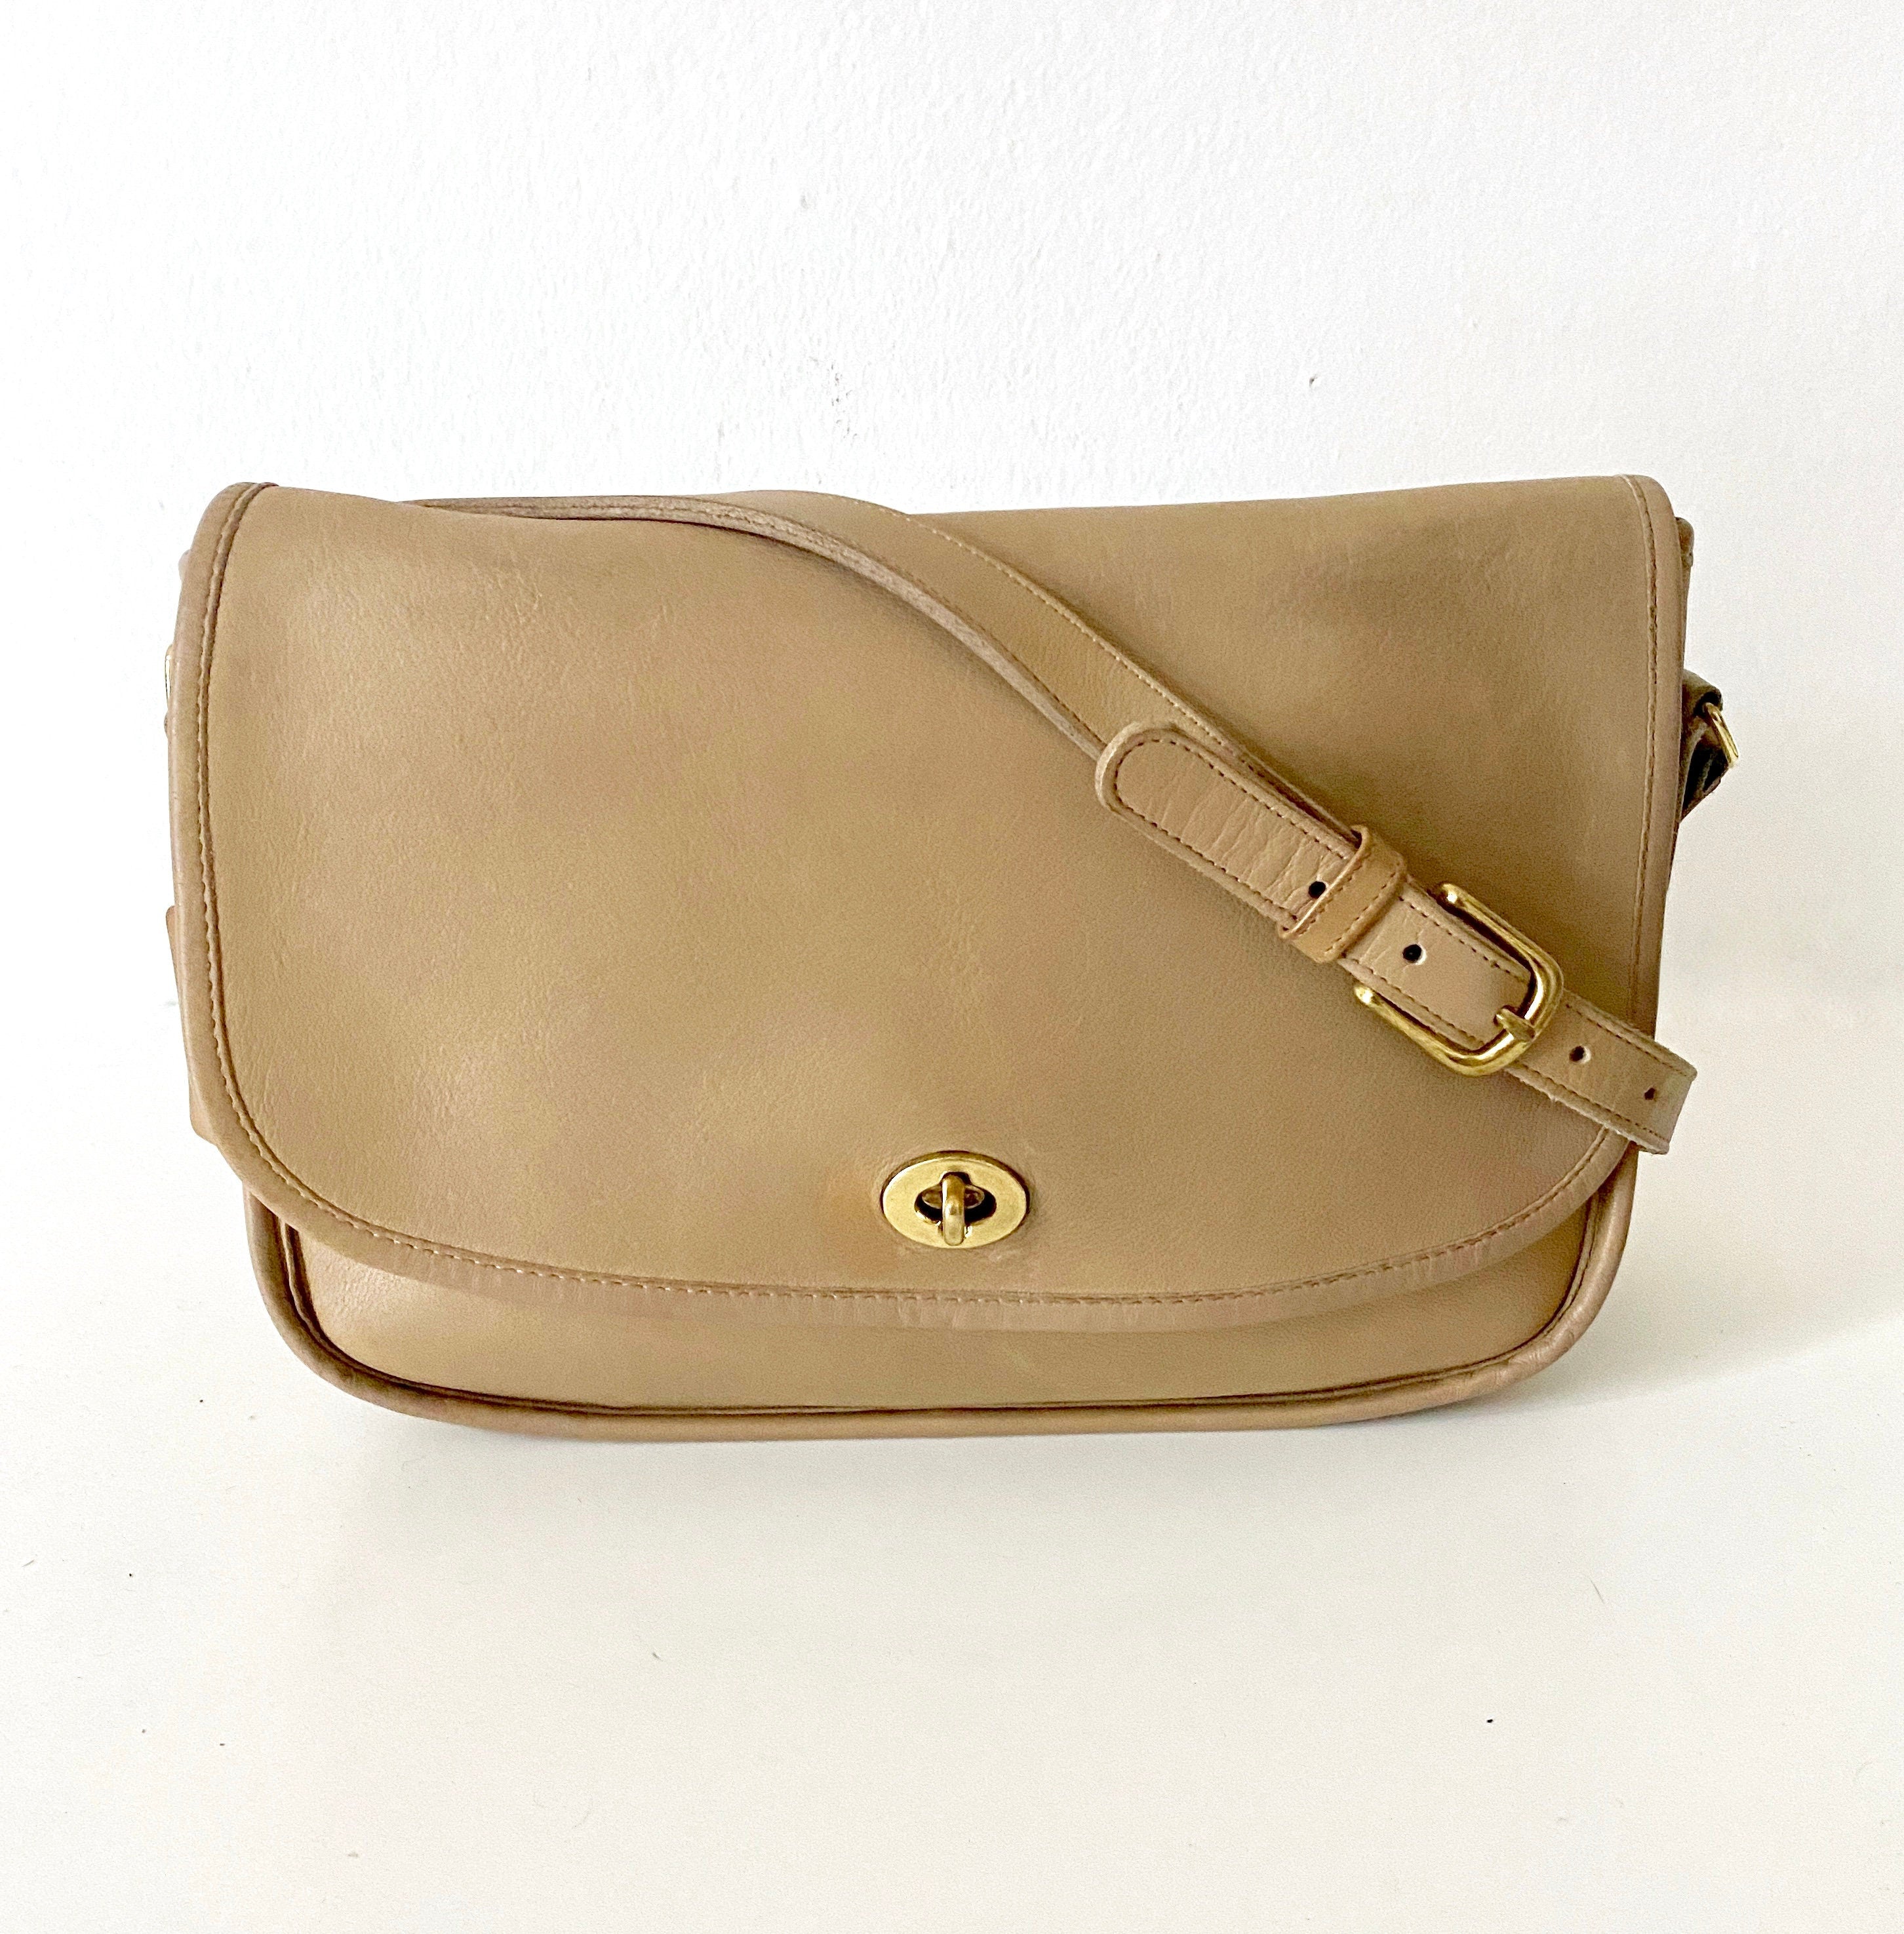 7 Vintage Coach Purses Worth Digging Out of Your Mom's Closet | LoveToKnow